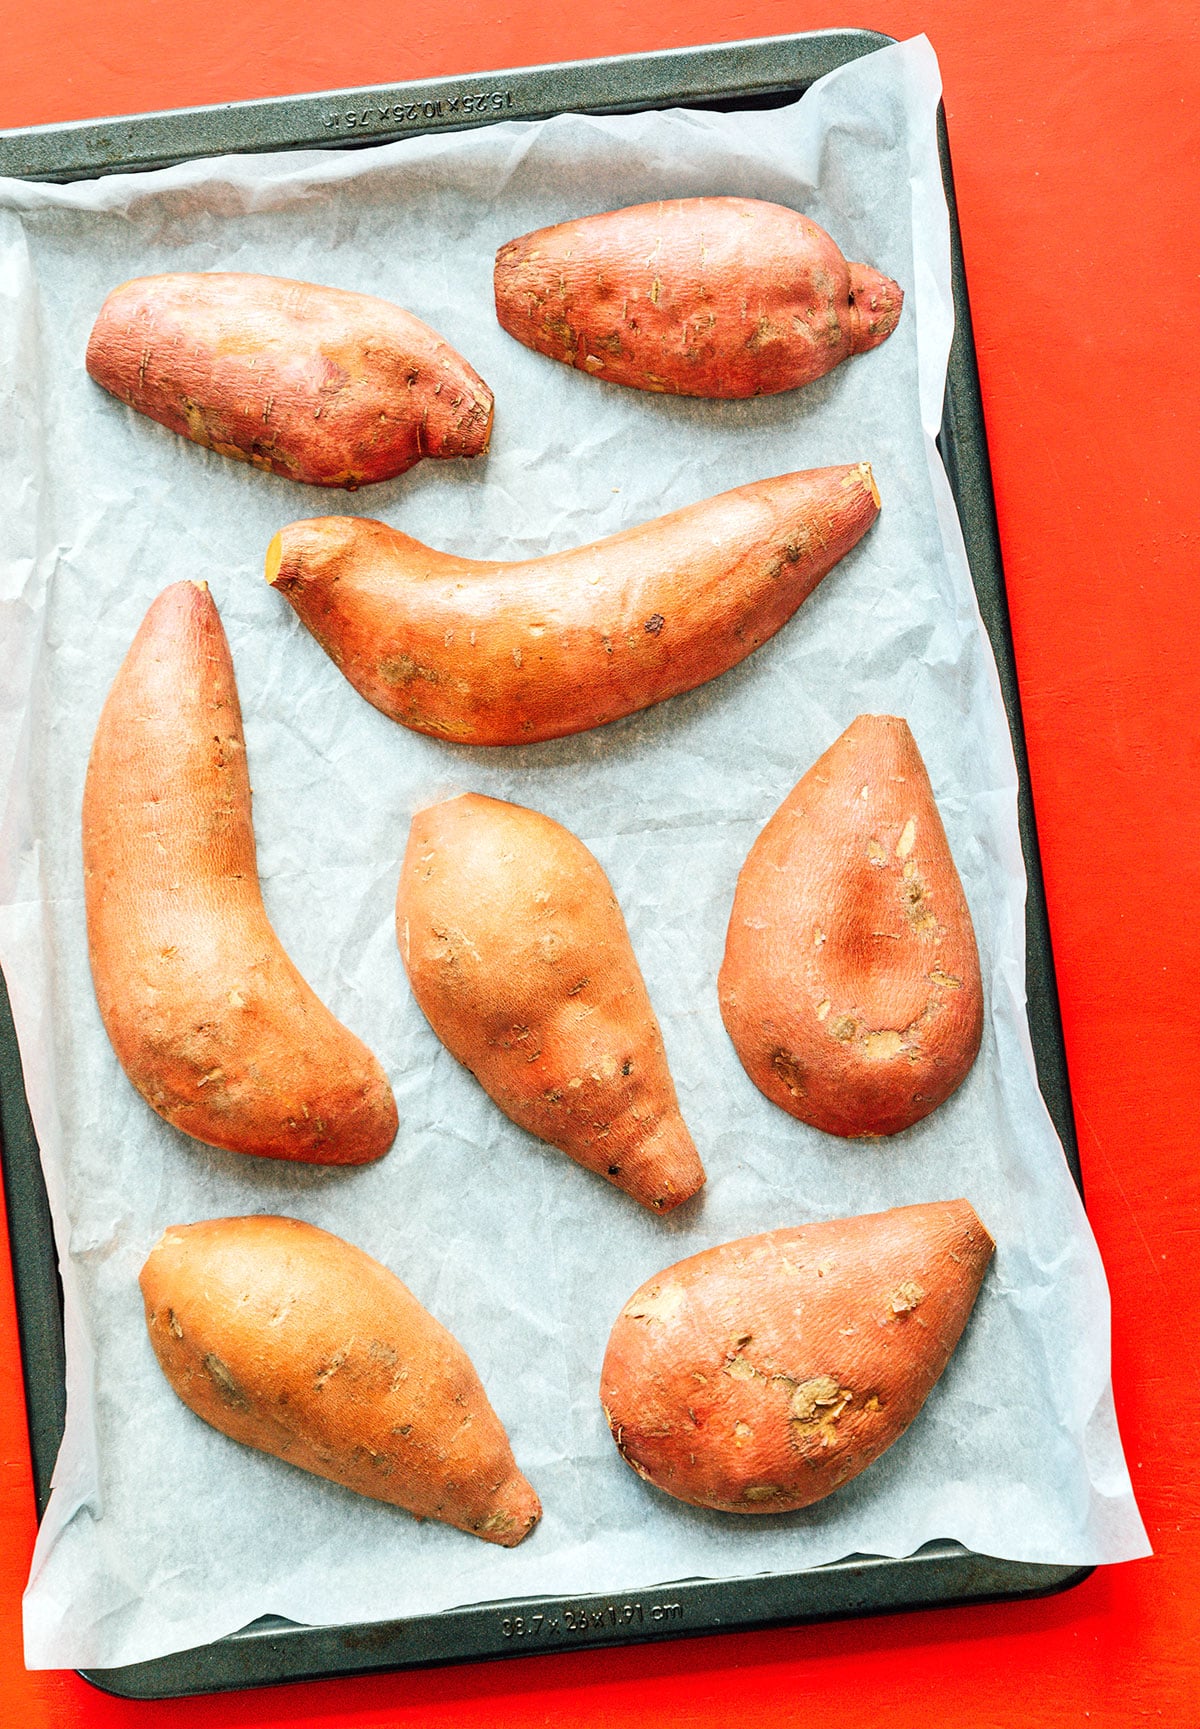 A baking tray lined with parchment paper and topped with halved sweet potatoes lying cut side down